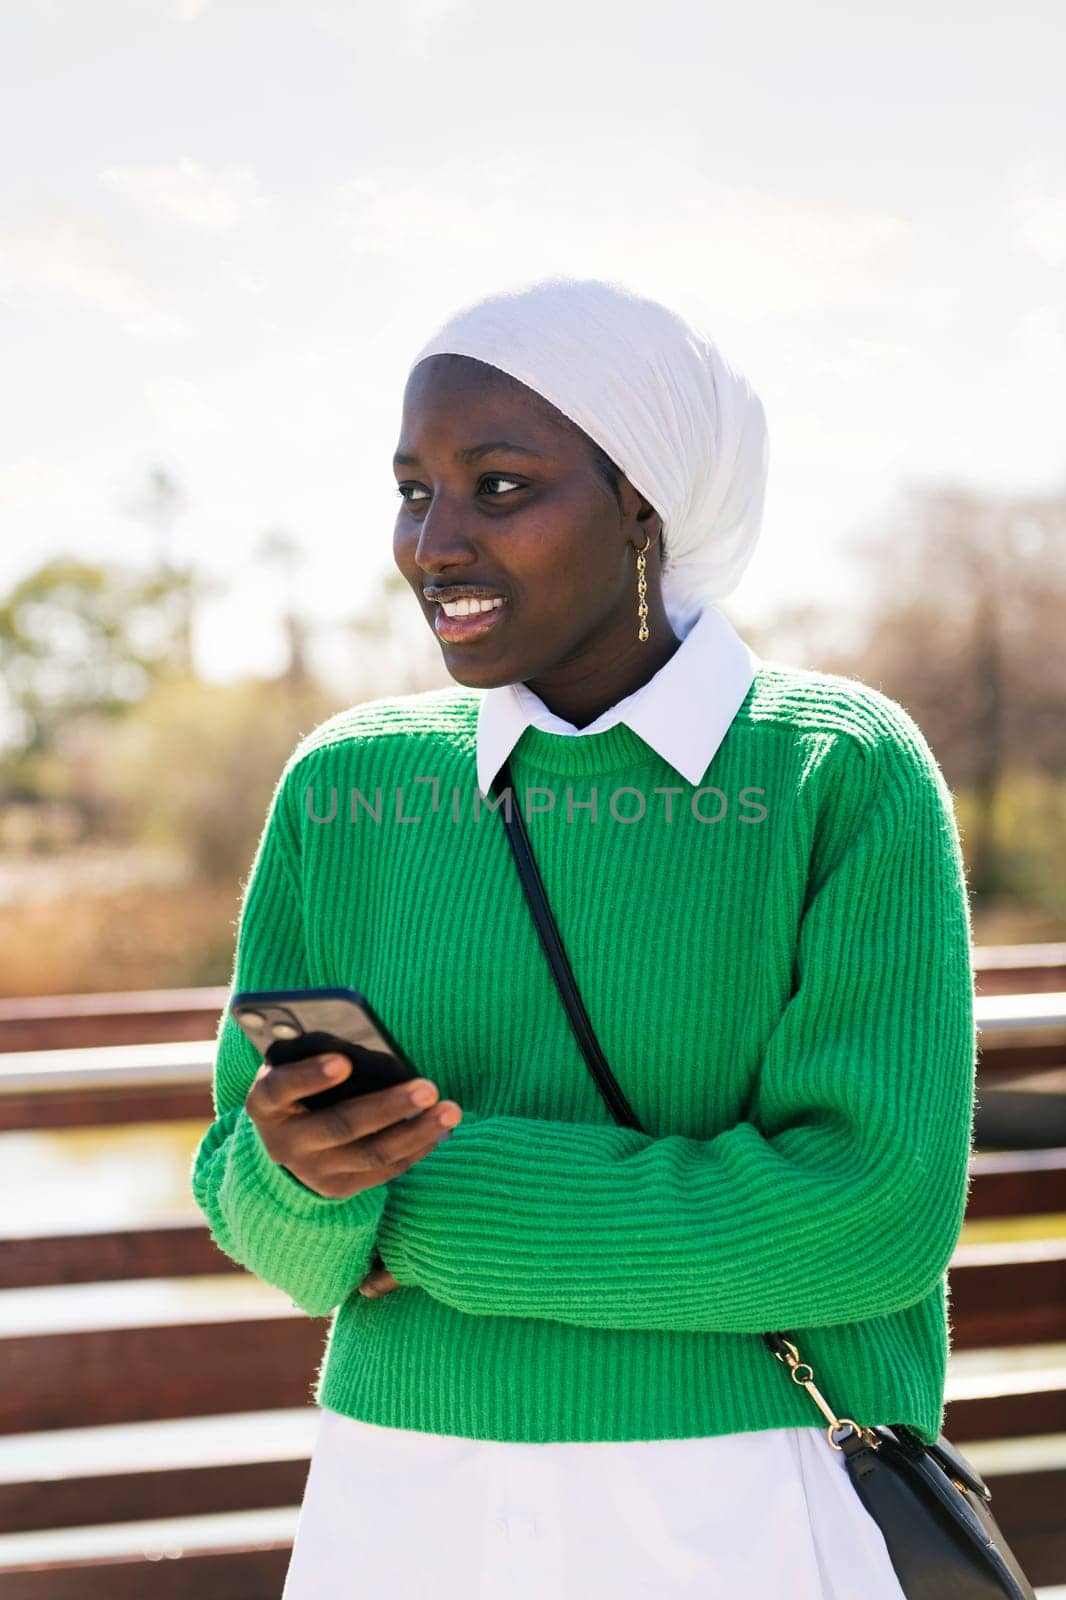 young african woman using mobile phone outdoors, concept of technology of communication and modern lifestyle